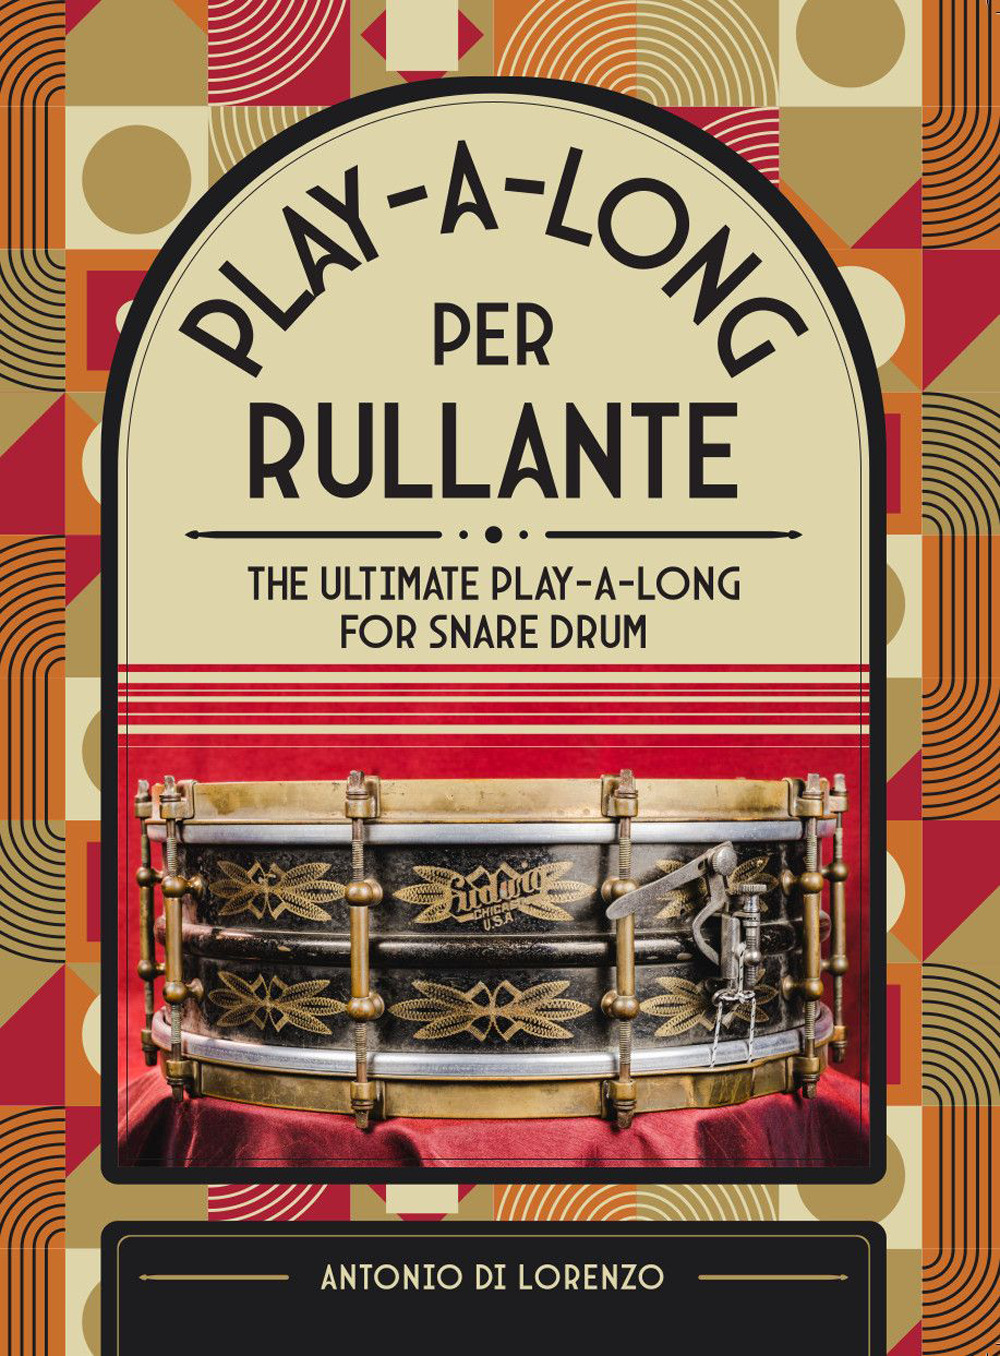 Play-a-long per rullante-The ultimate play-a-long for snare drum. Ediz. bilingue